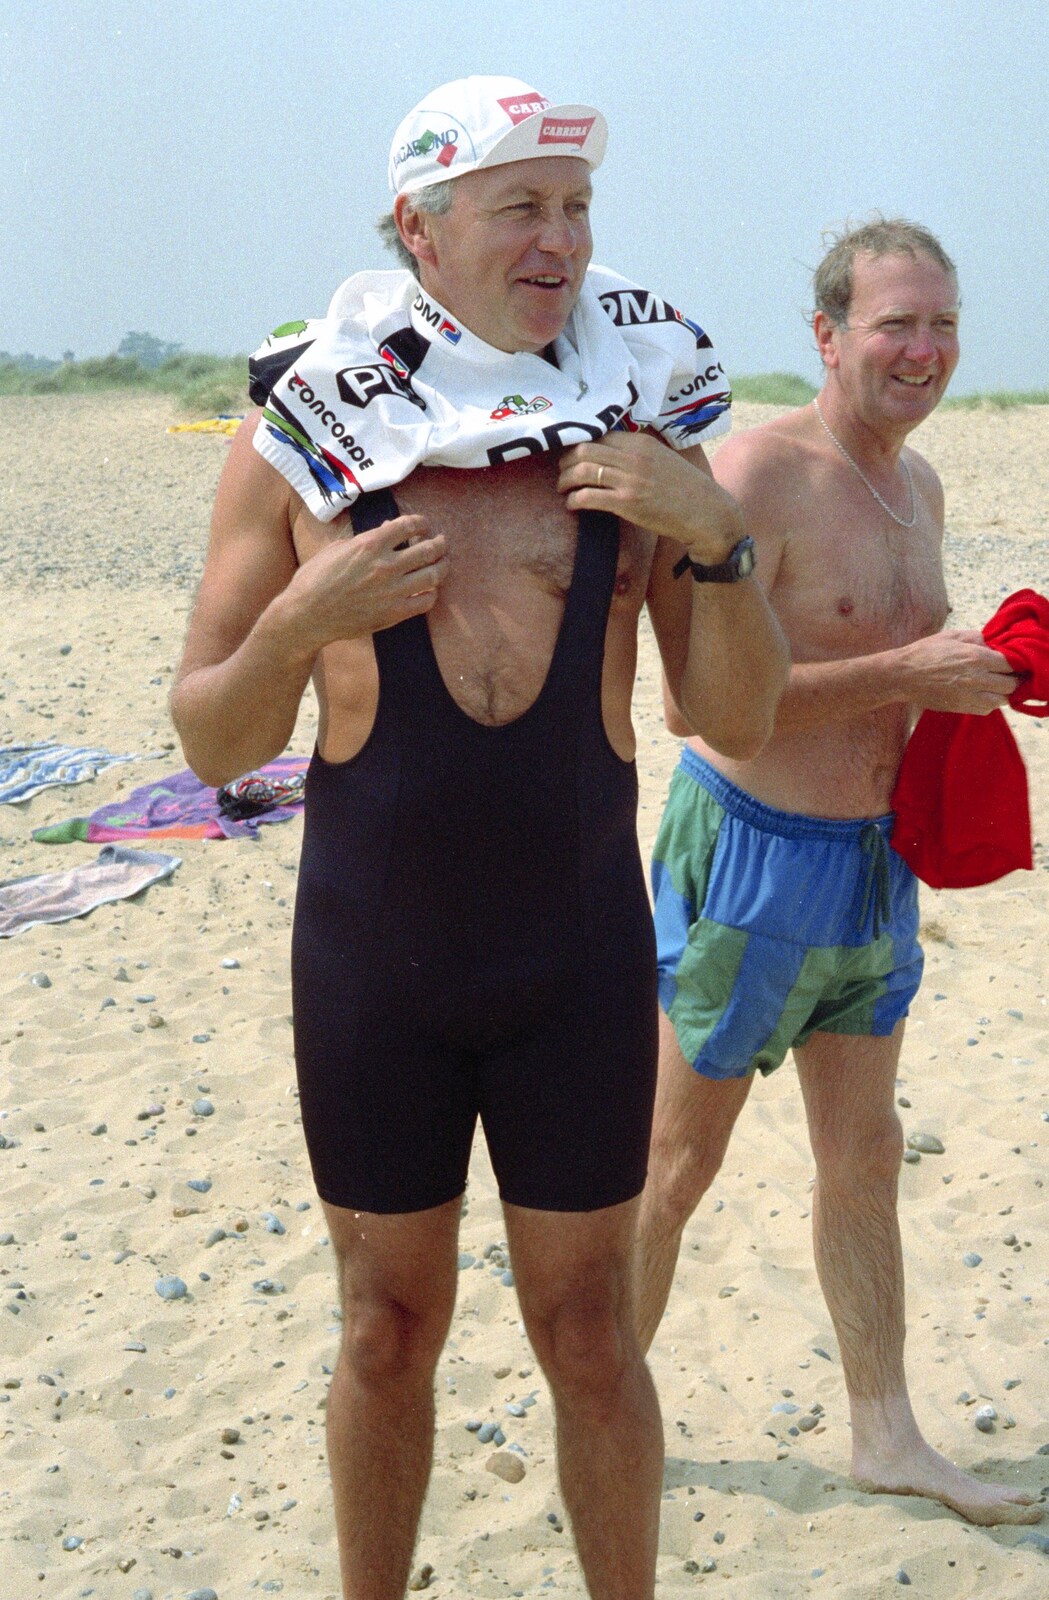 Keith, with 'Mankini' bib-shorts from BSCC at the Beach, Walberswick, Suffolk - 15th July 1997